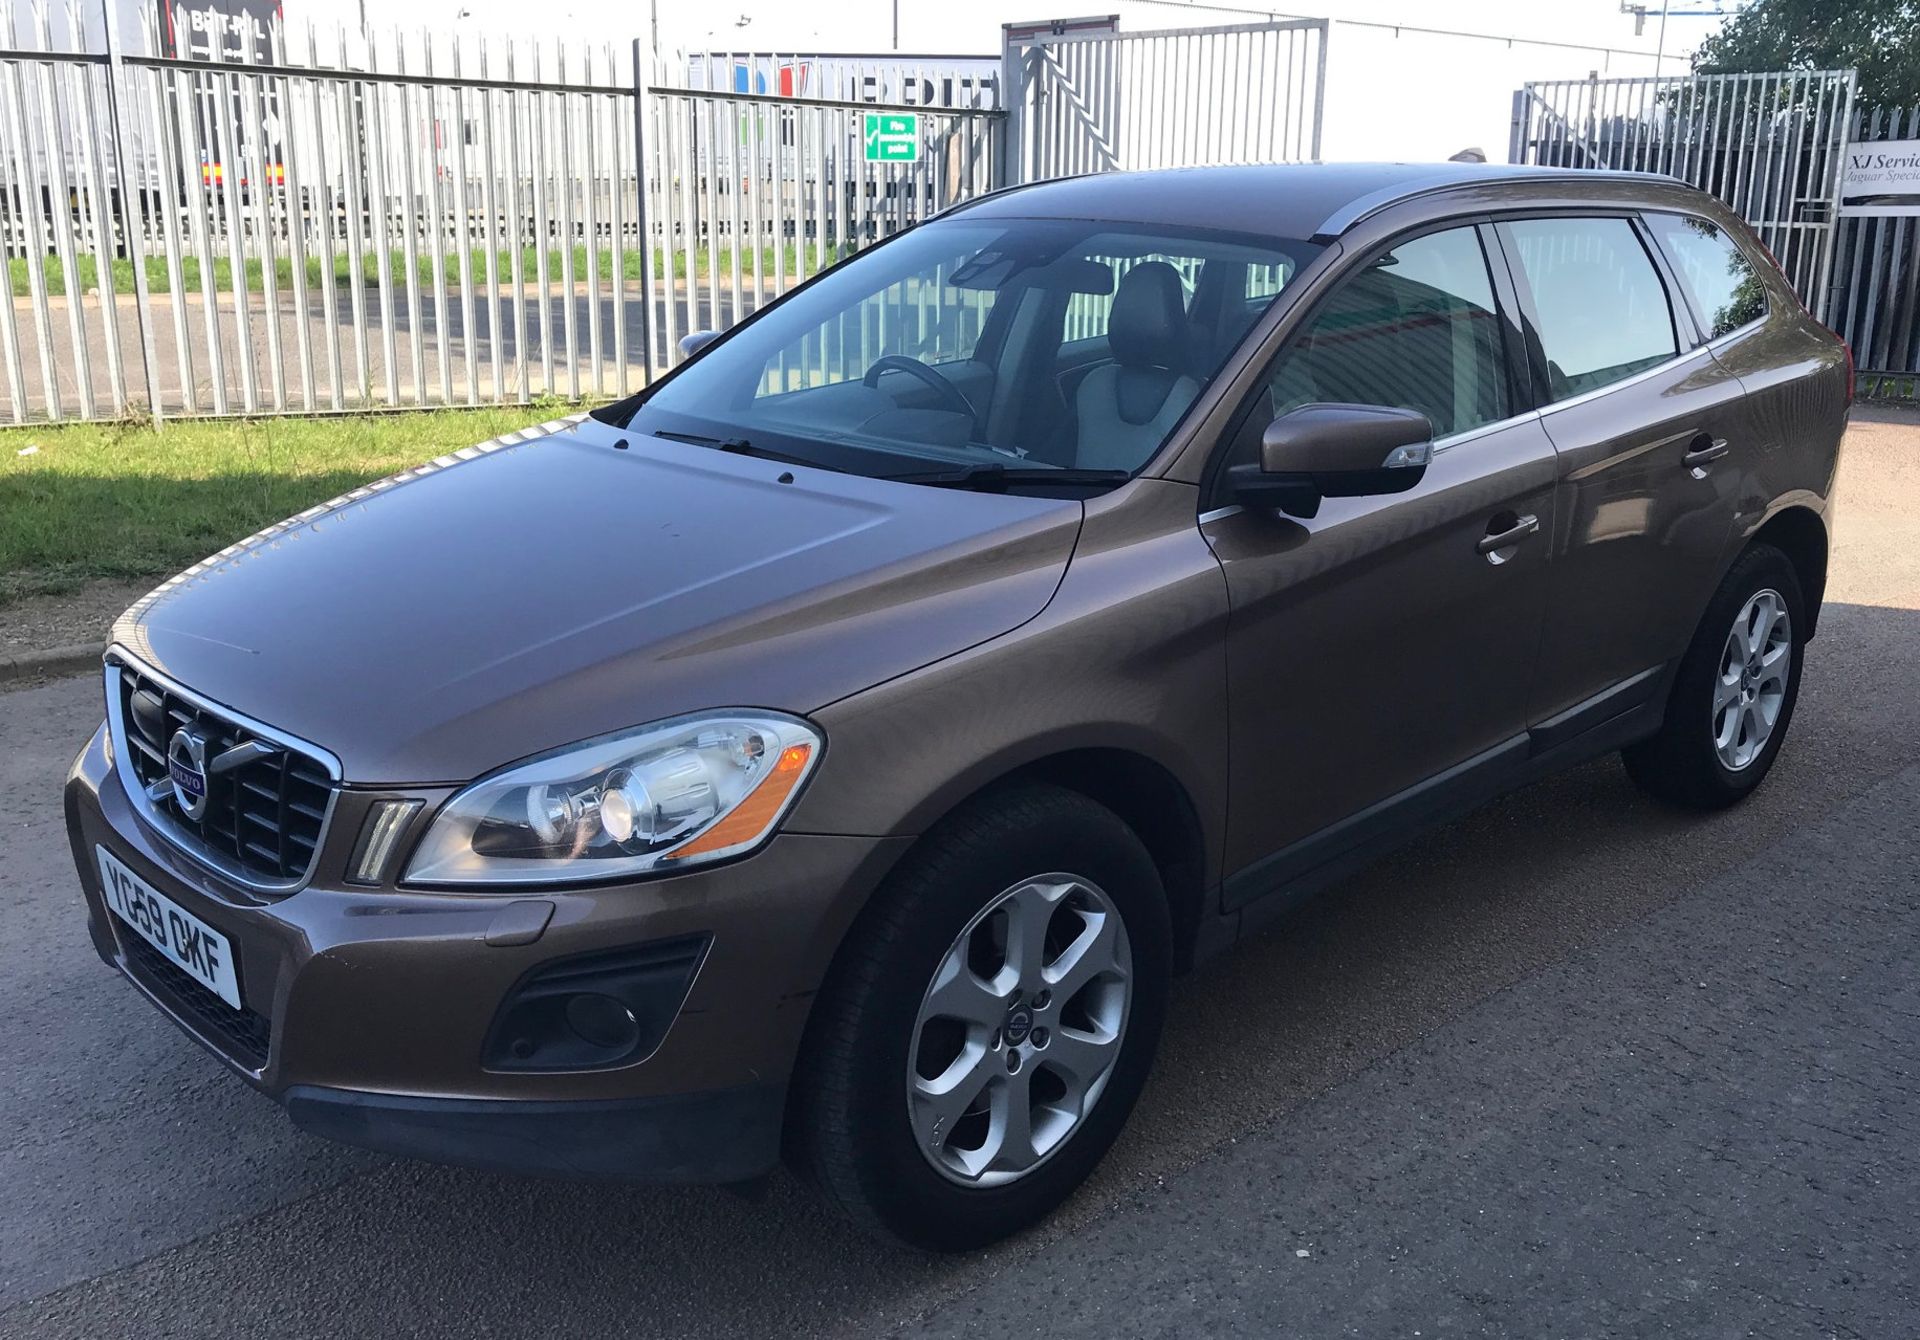 2009 Volvo XC60 2.4D SE Lux Auto 5 Door 4x4 - CL505 - NO VAT ON THE HAMMER - Location: Corby, - Image 12 of 16